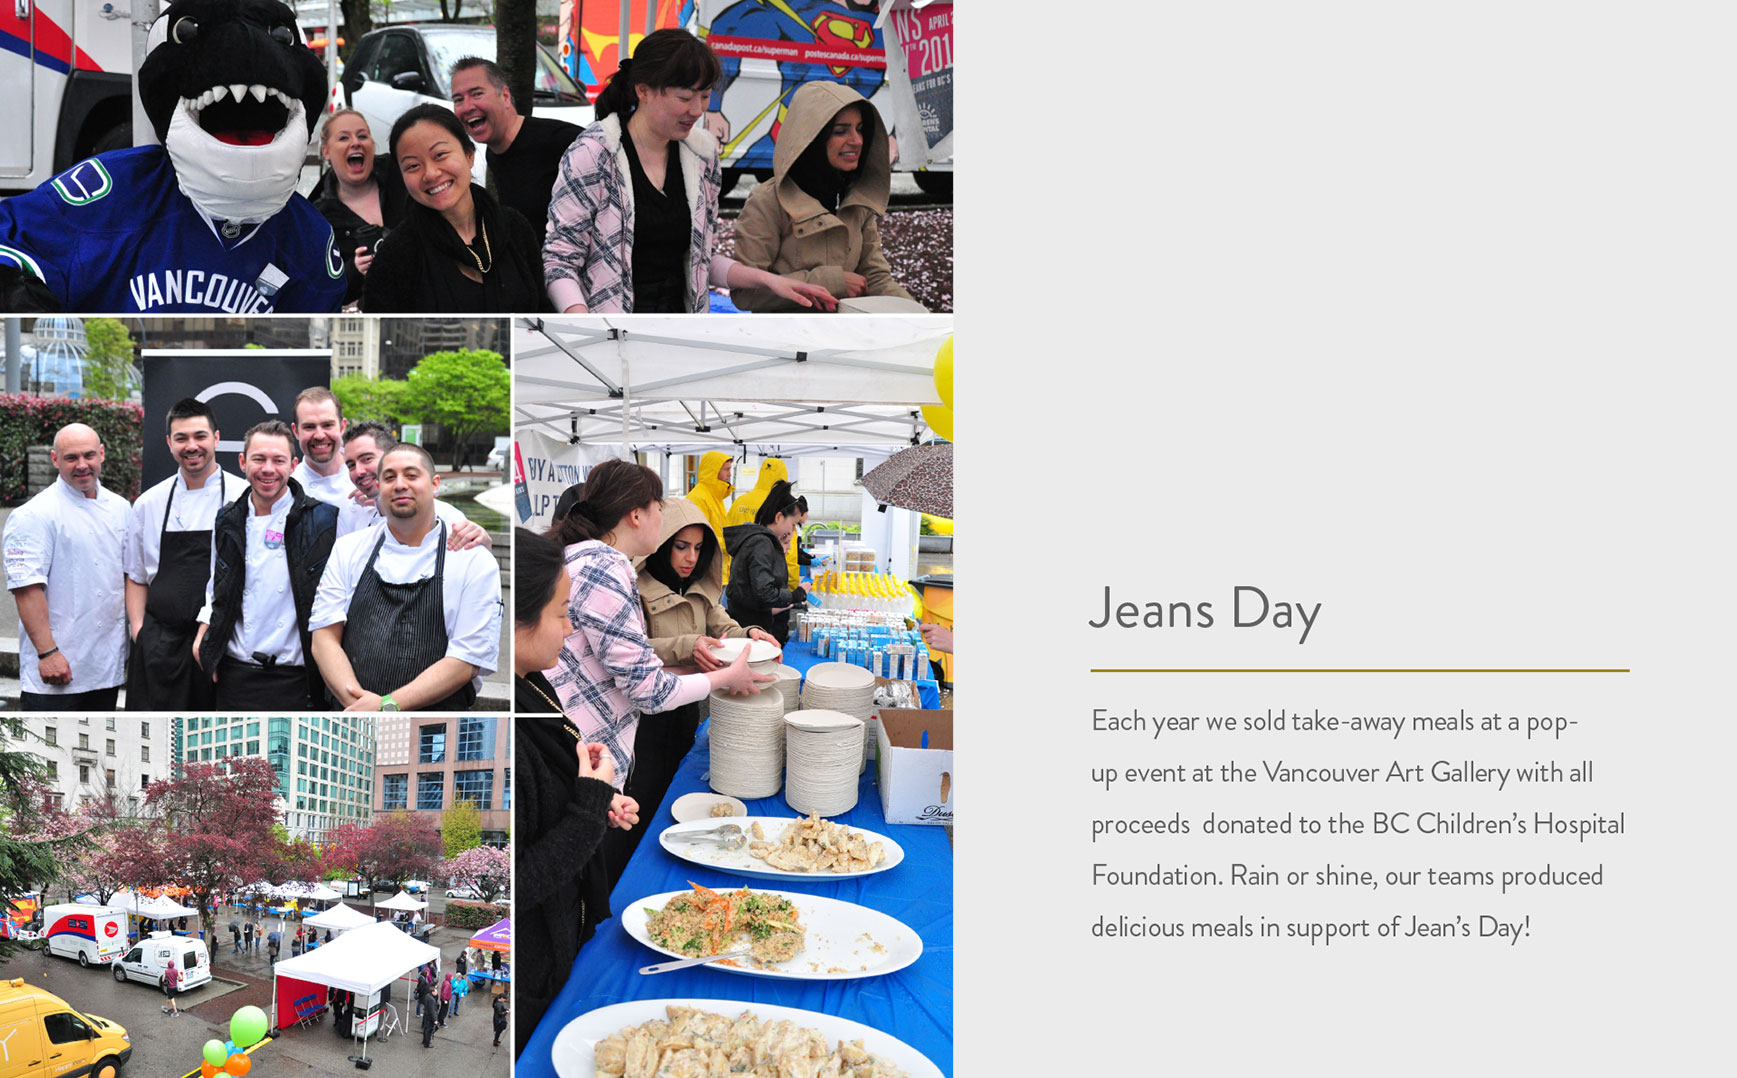 Each year we sold take-away meals at a pop-up event at the Vancouver Art Gallery with all proceeds  donated to the BC Children’s Hospital Foundation. Rain or shine, our teams produced delicious meals in support of Jean’s Day! 